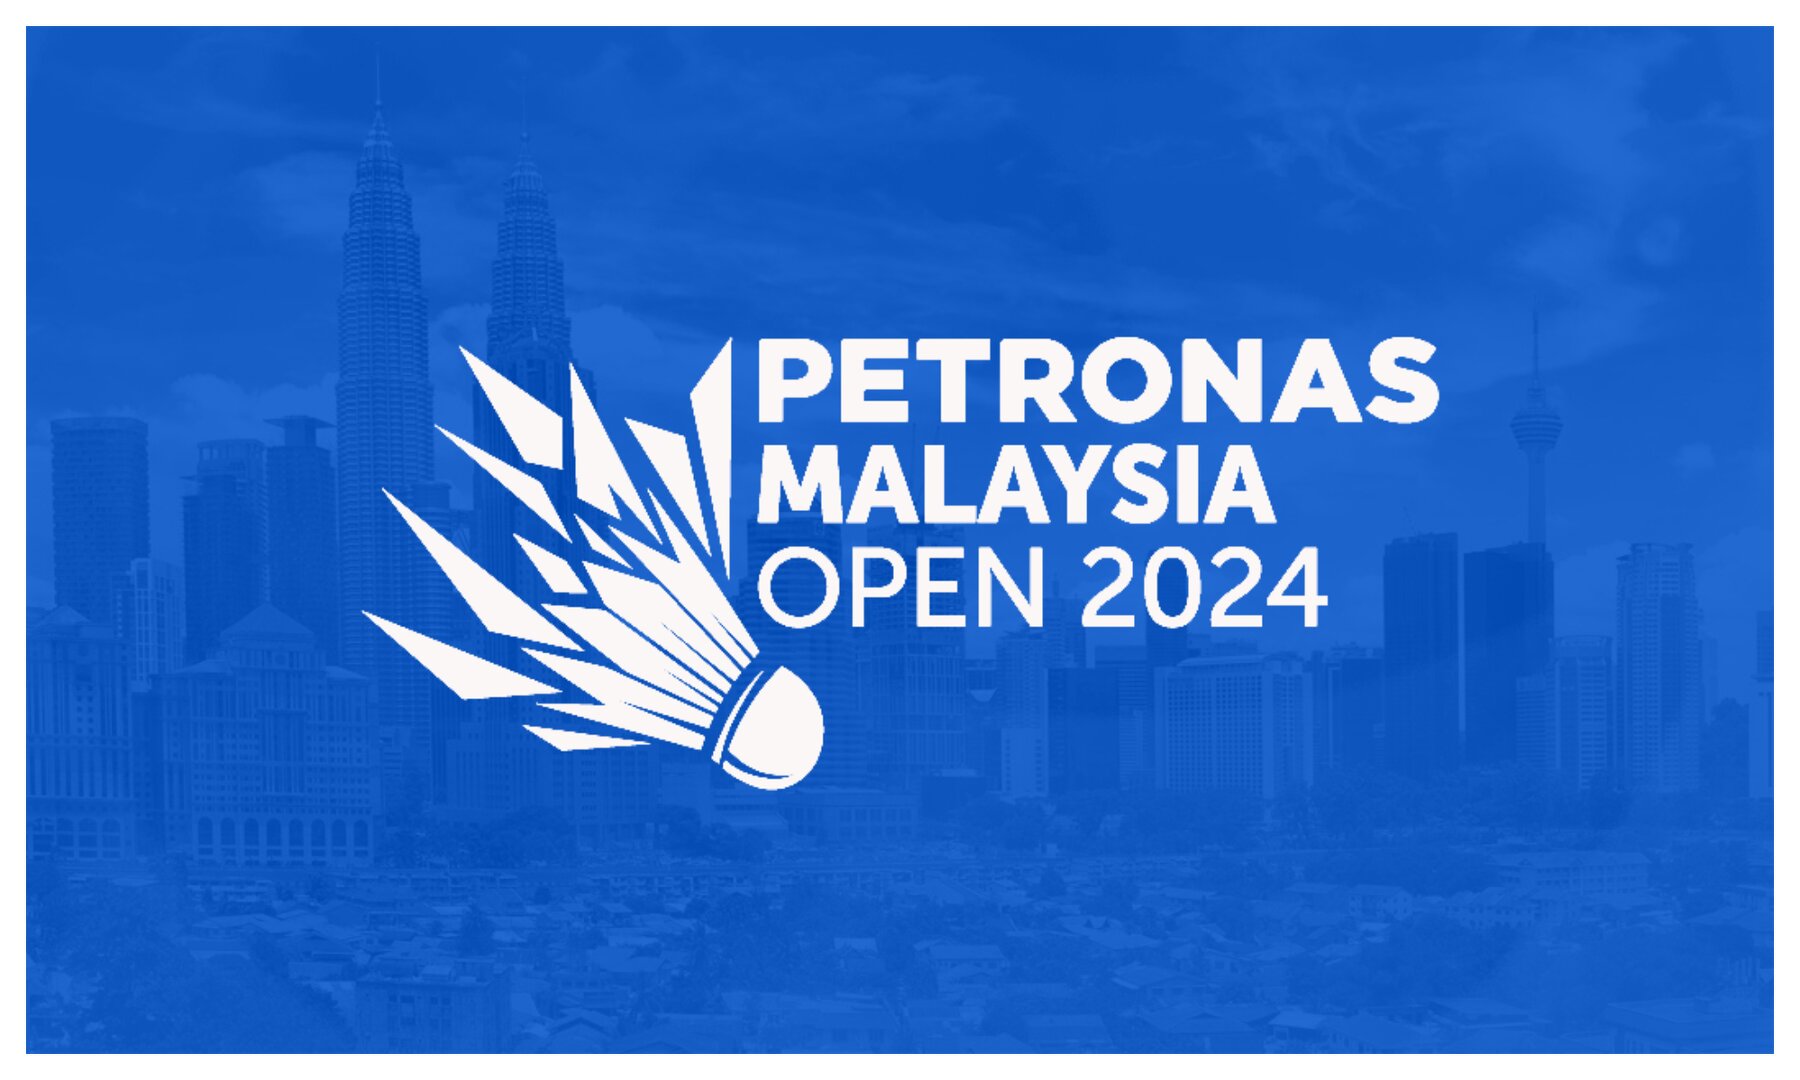 Where and how to watch BWF Malaysia Open 2024 live in Indonesia?